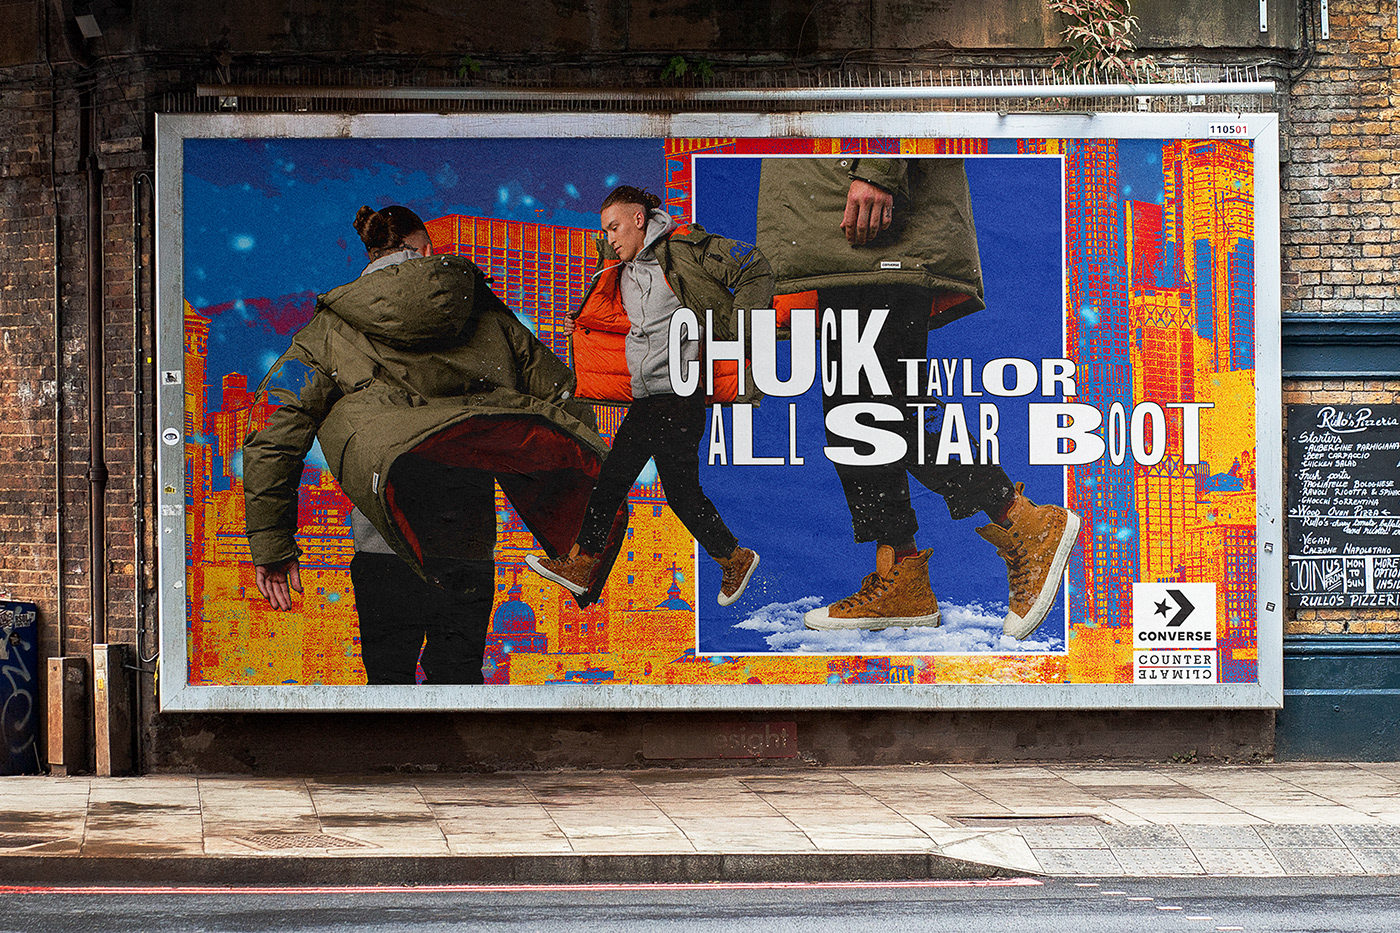 converse Chuck Taylor counter climate poster Fashion  winter anomaly all star FW17 streetstyle